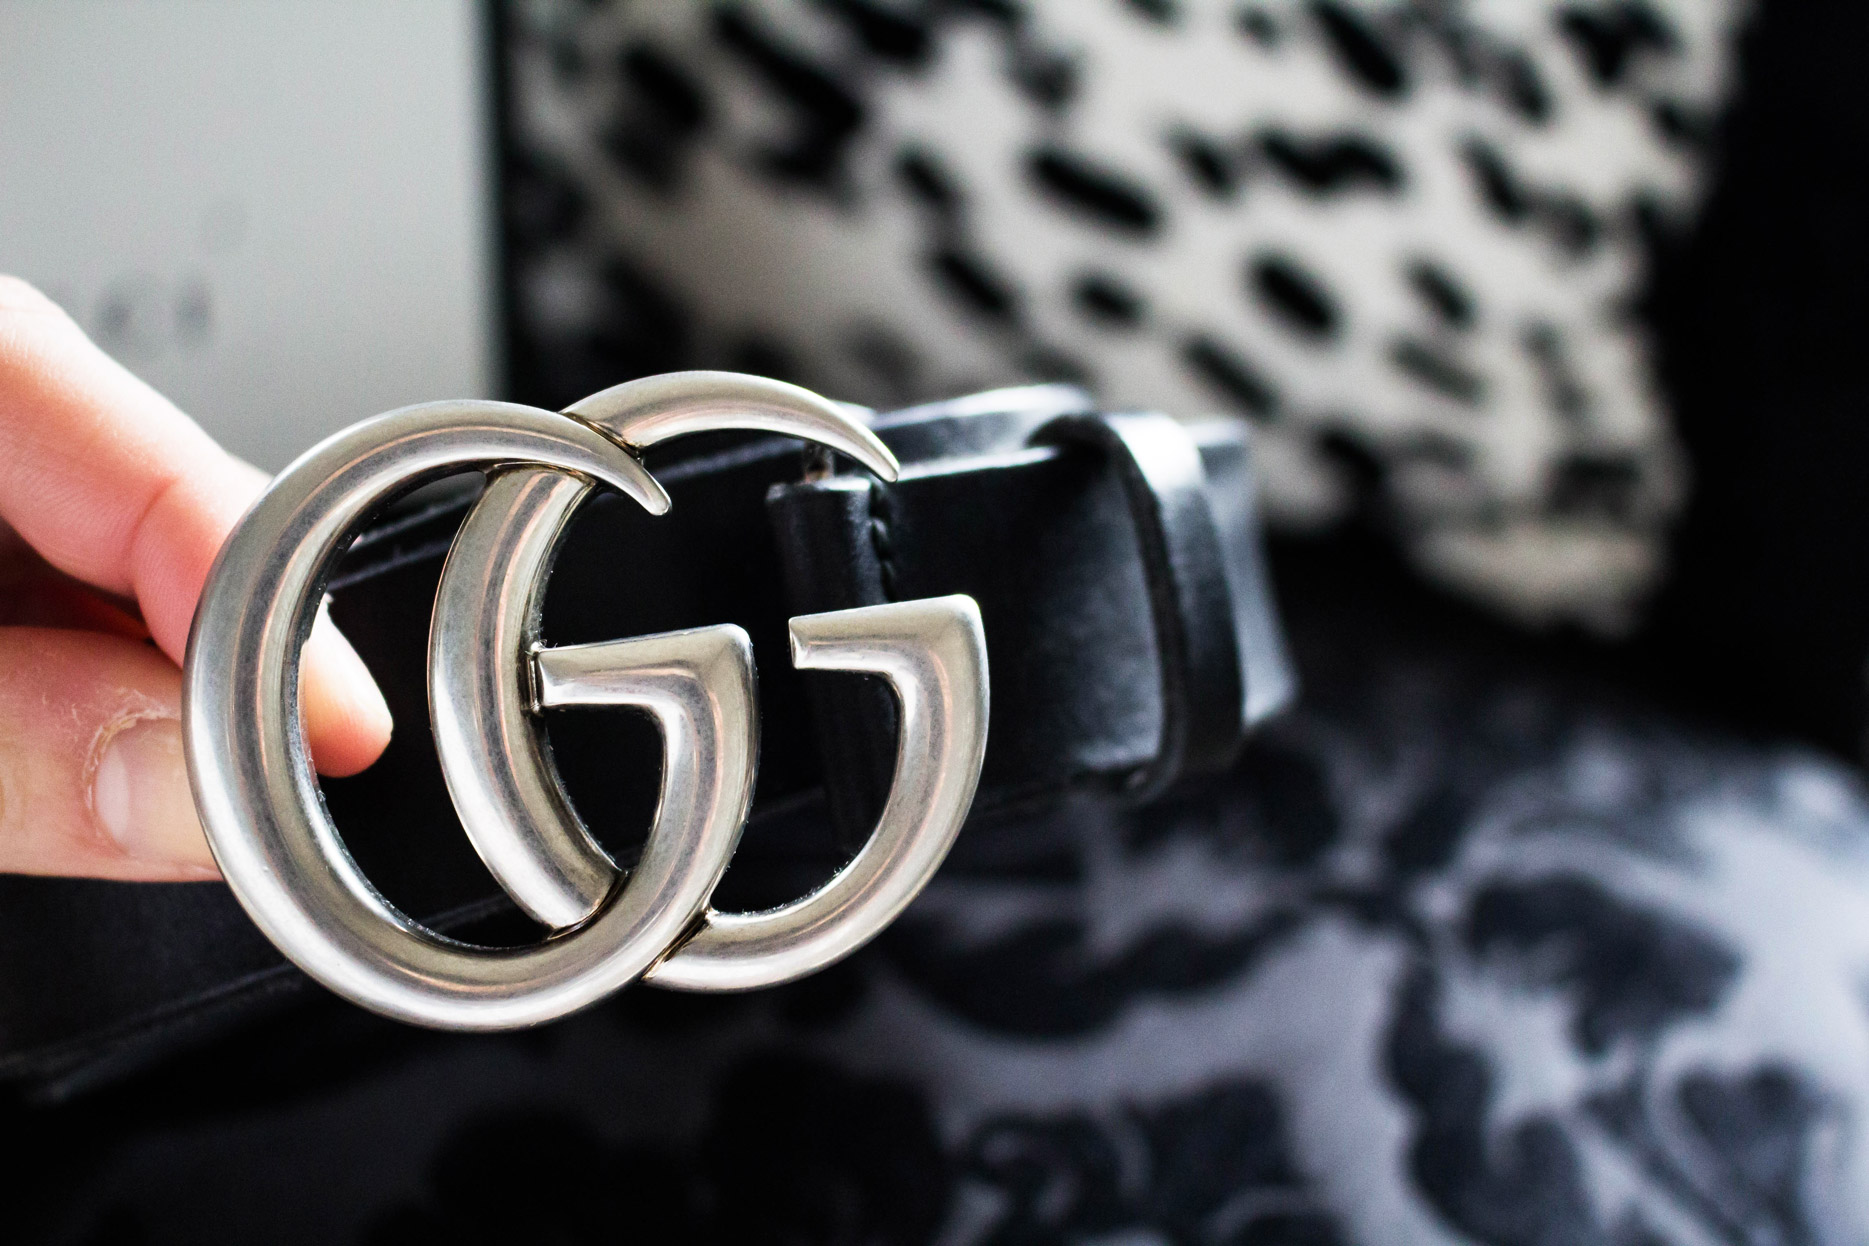 Everything You Need to Know About Buying a Double G Gucci Belt